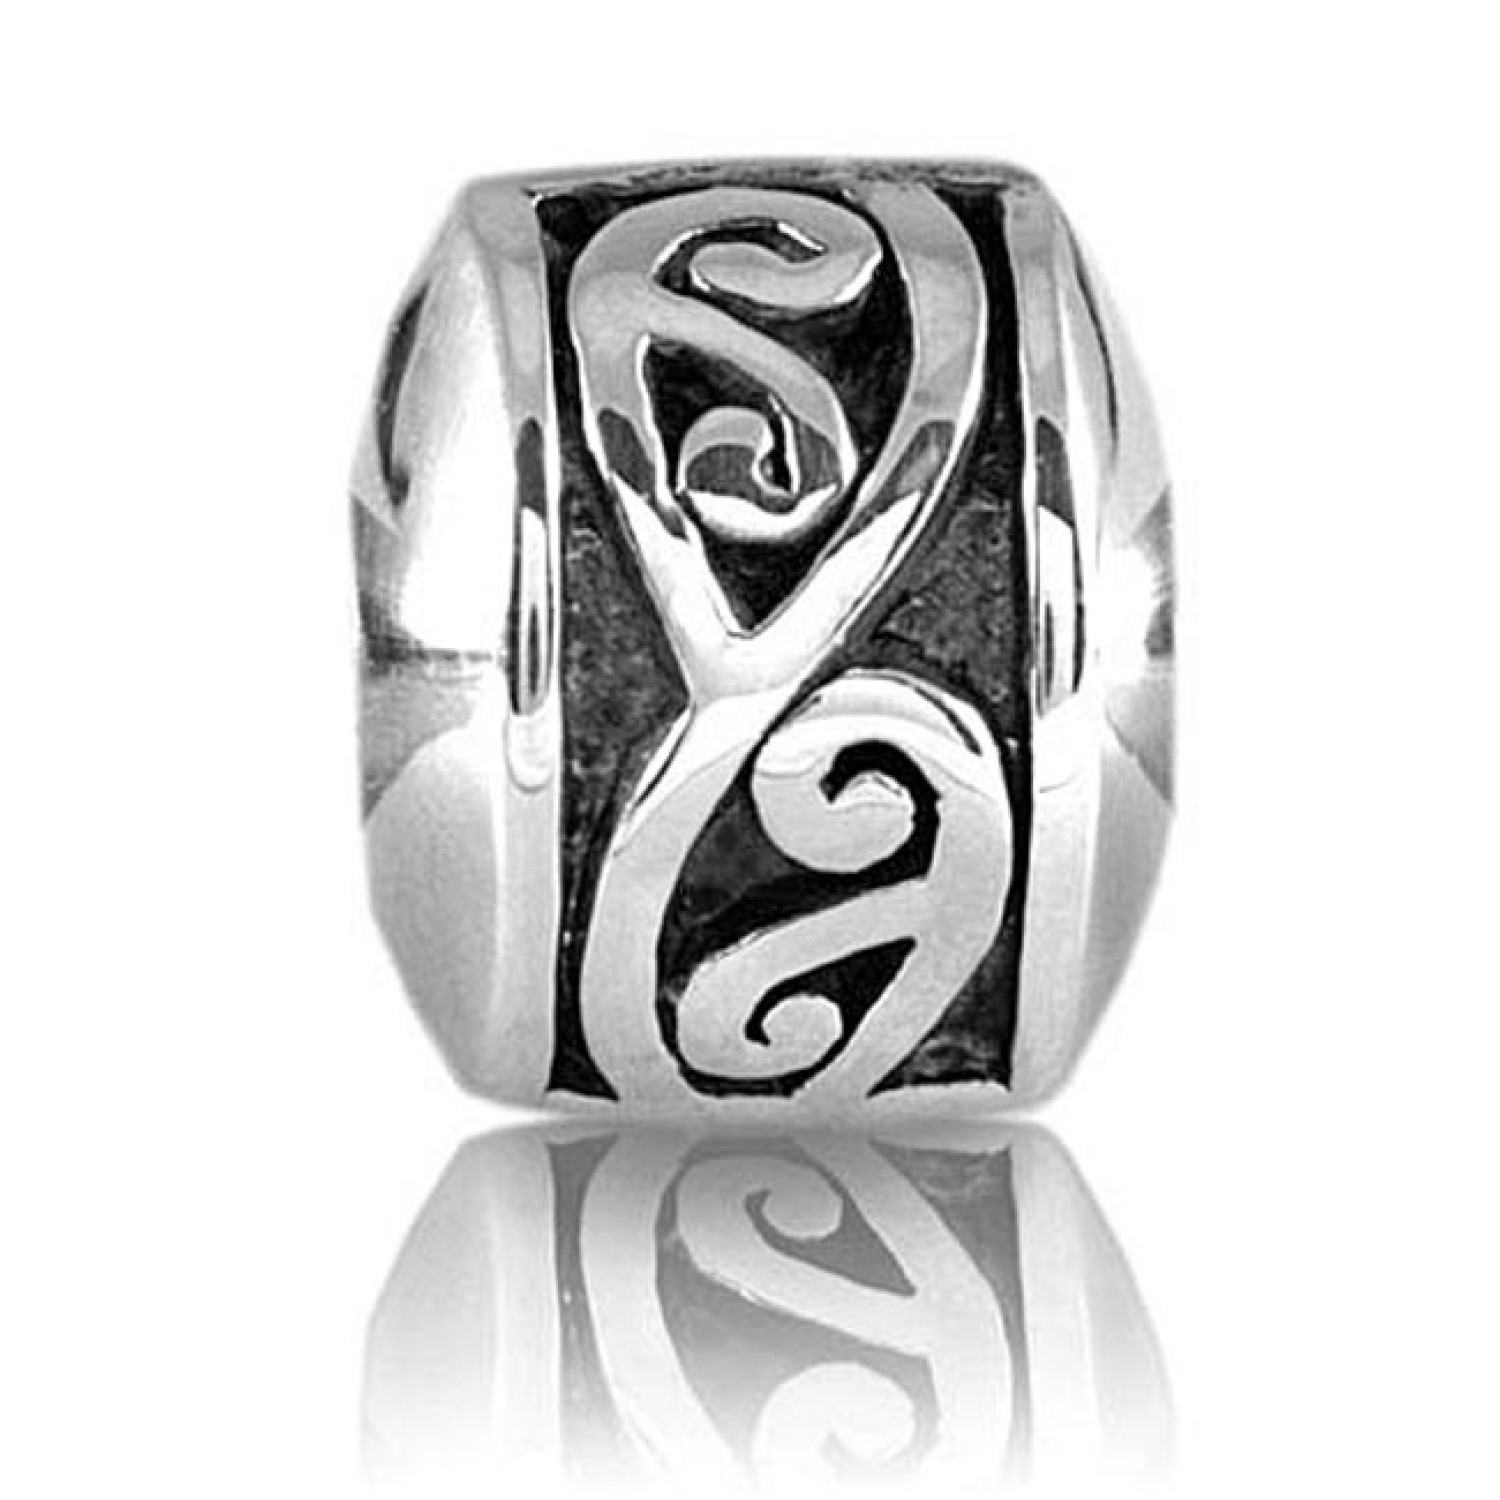 LKC012 Evolve NZ Charms Clip Continuum Stopper. New Zealand Charms Clip Continuum Clip Stopper The infinite flow of the korus, etched deep into the silver, celebrates the nurturing power of those close bonds we share with friends and family. Used to stop 